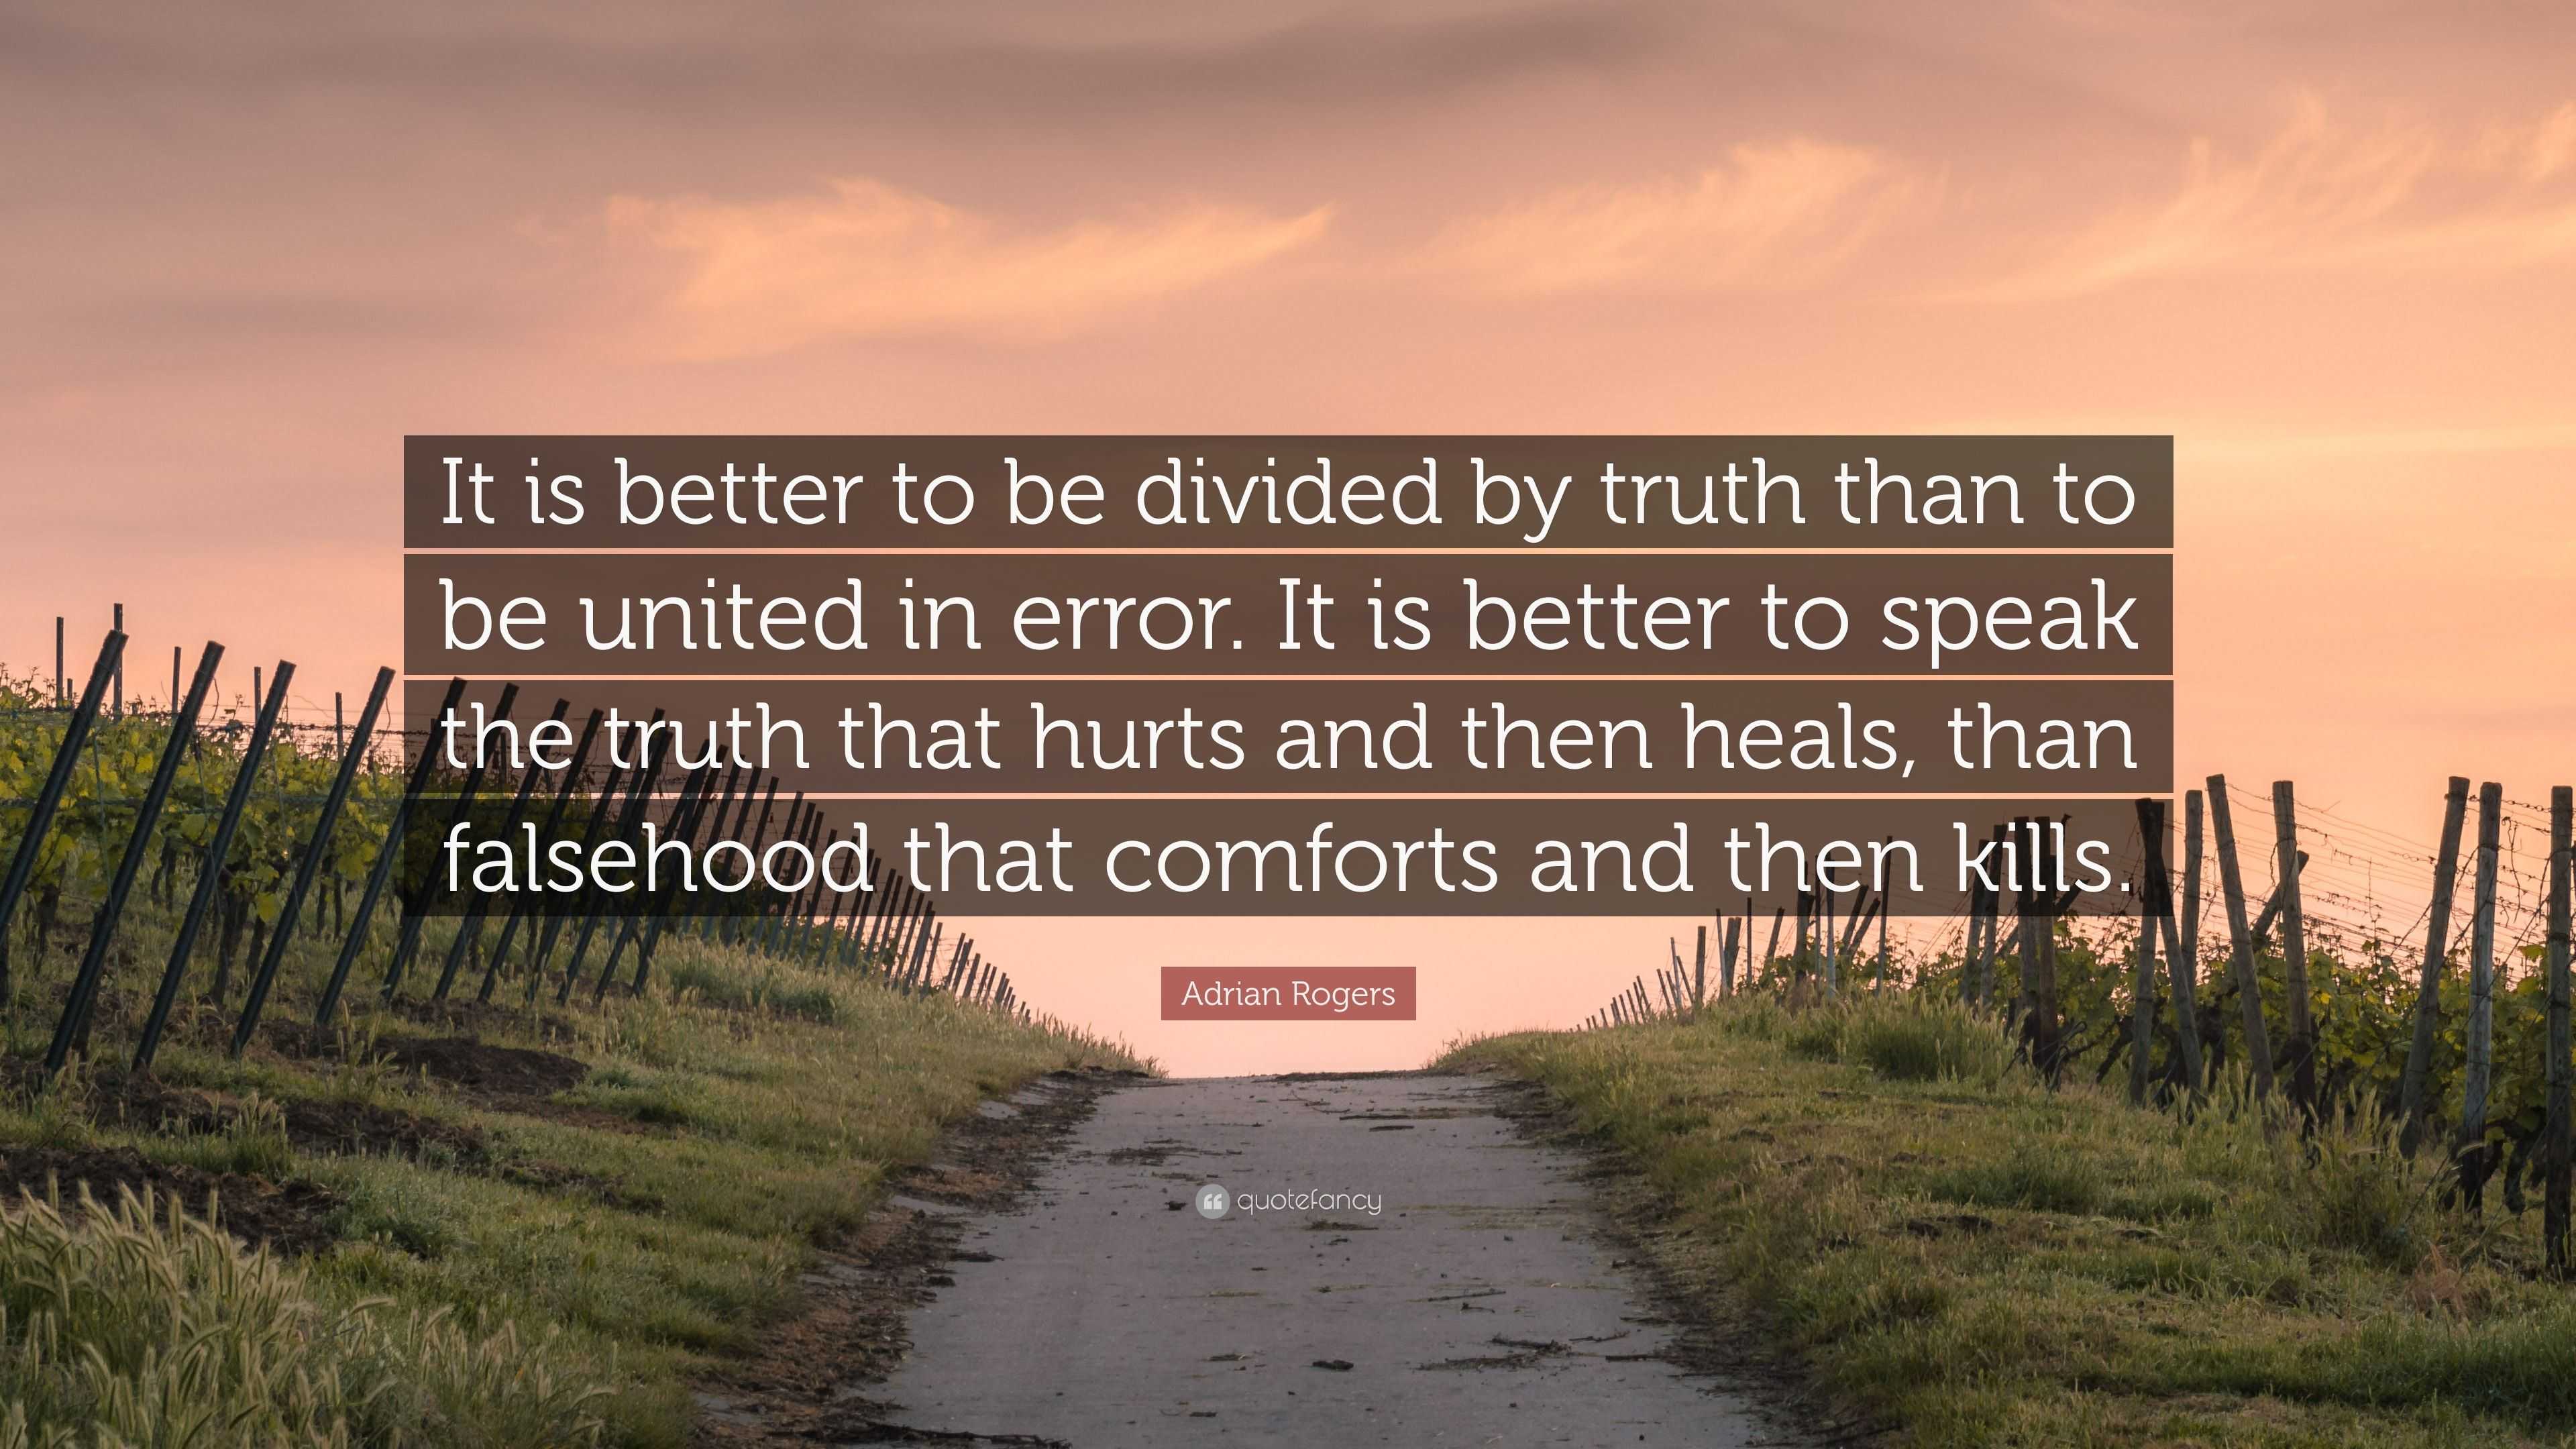 4954441 Adrian Rogers Quote It is better to be divided by truth than to be